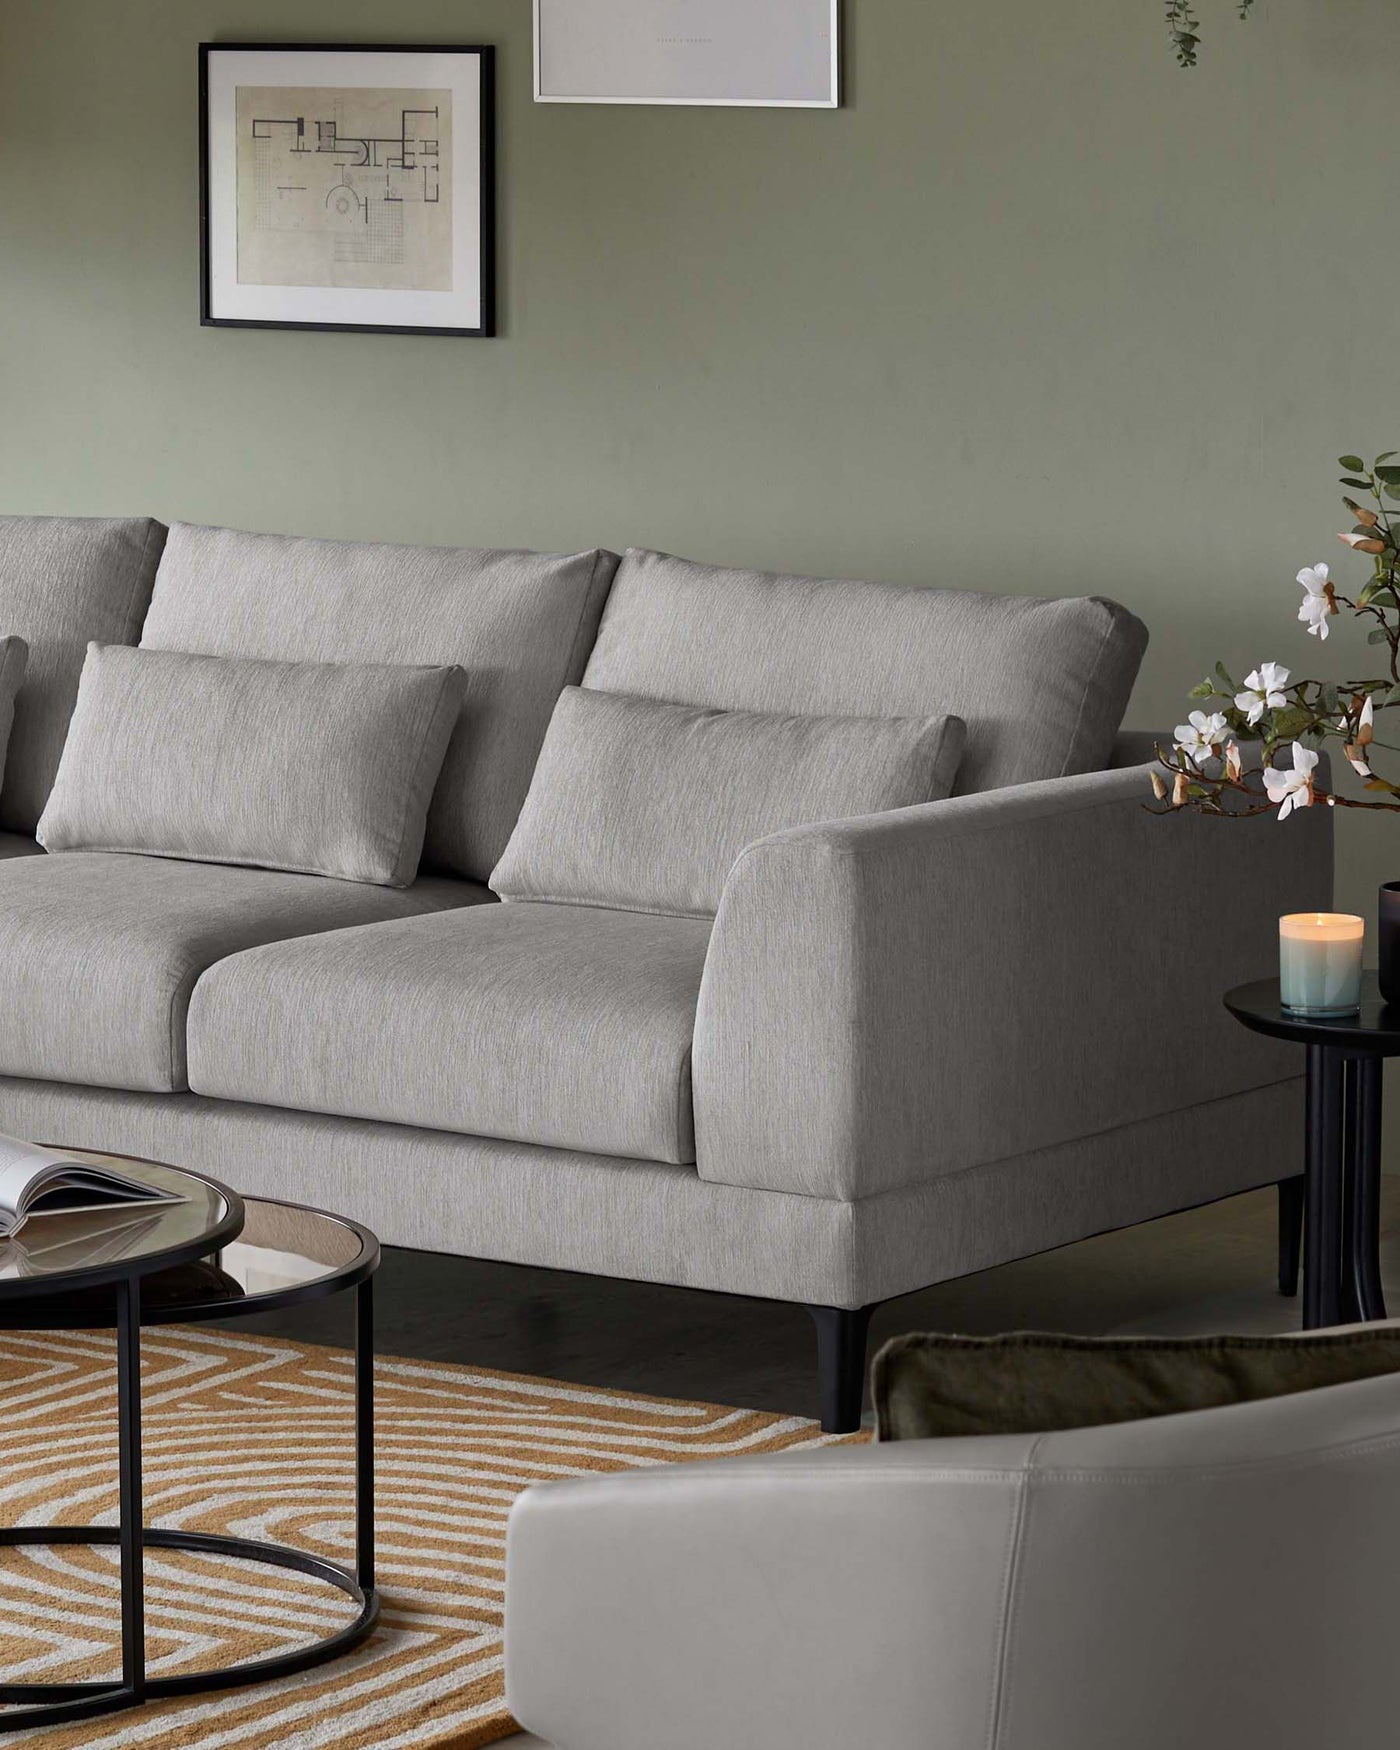 Modern three-seater sofa with grey fabric upholstery and streamlined silhouette, featuring clean lines and a minimalist design. Accompanied by a sleek round side table with a black frame and glass top, placed on a geometric-patterned area rug with cream and mustard hues.